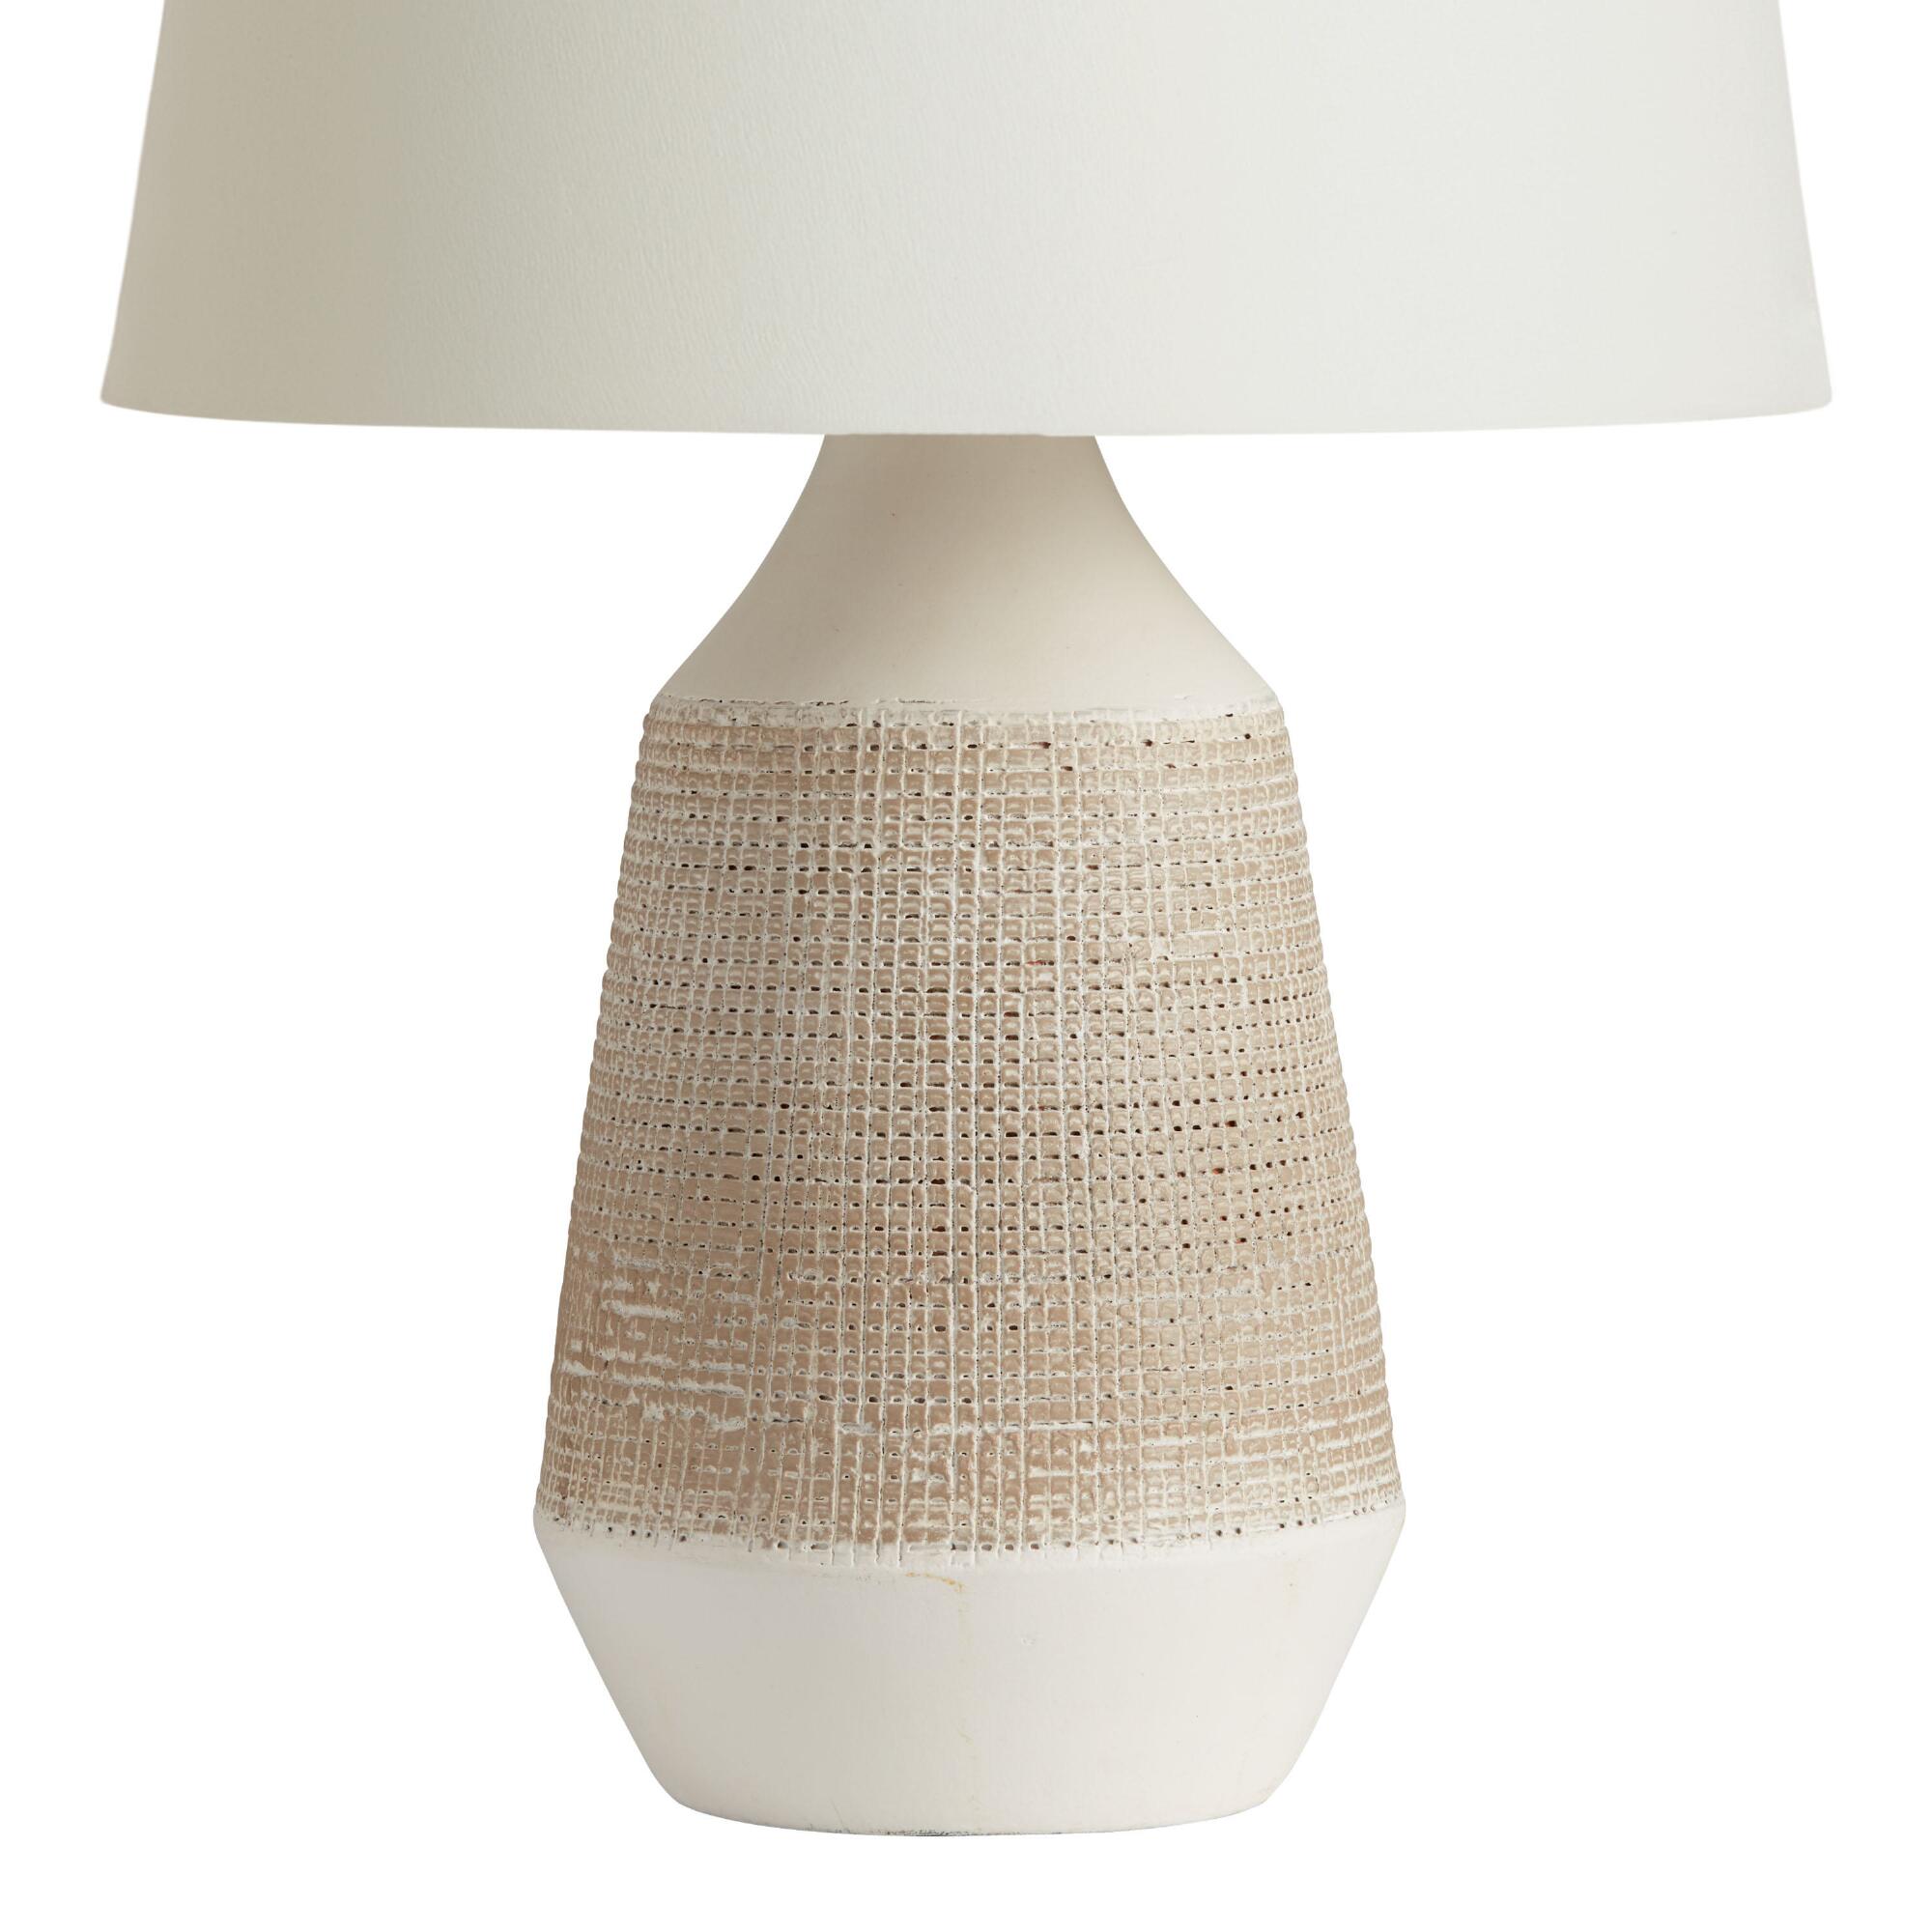 White and Gray Textured Ceramic Table Lamp Base by World Market